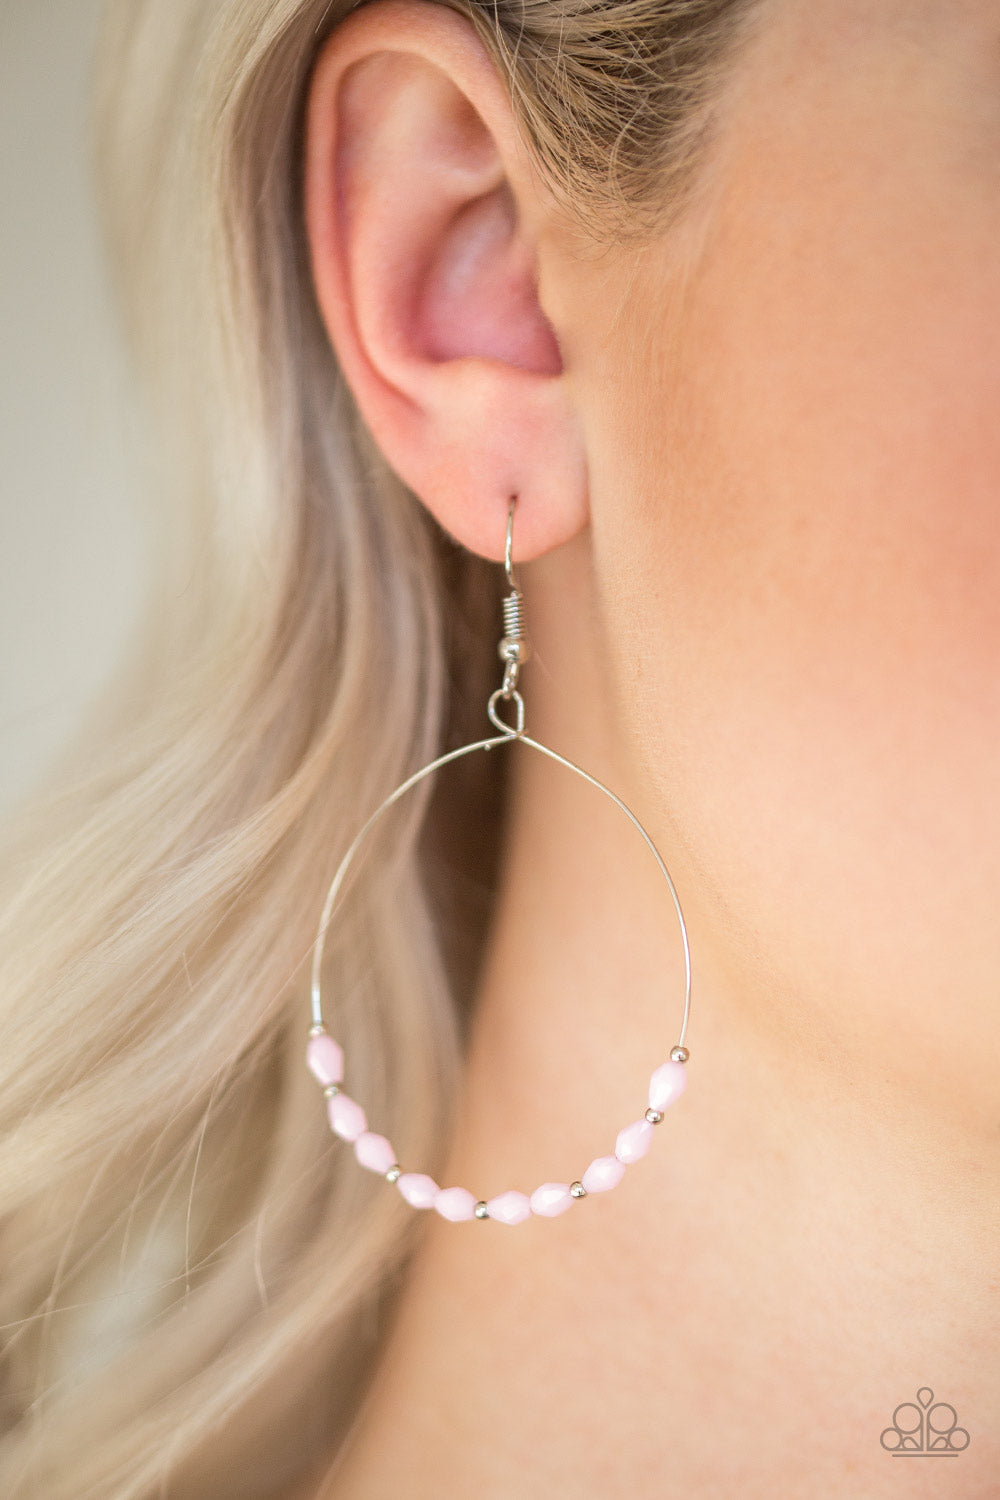 Paparazzi Accessories Prize Winning Sparkle - Pink Earrings